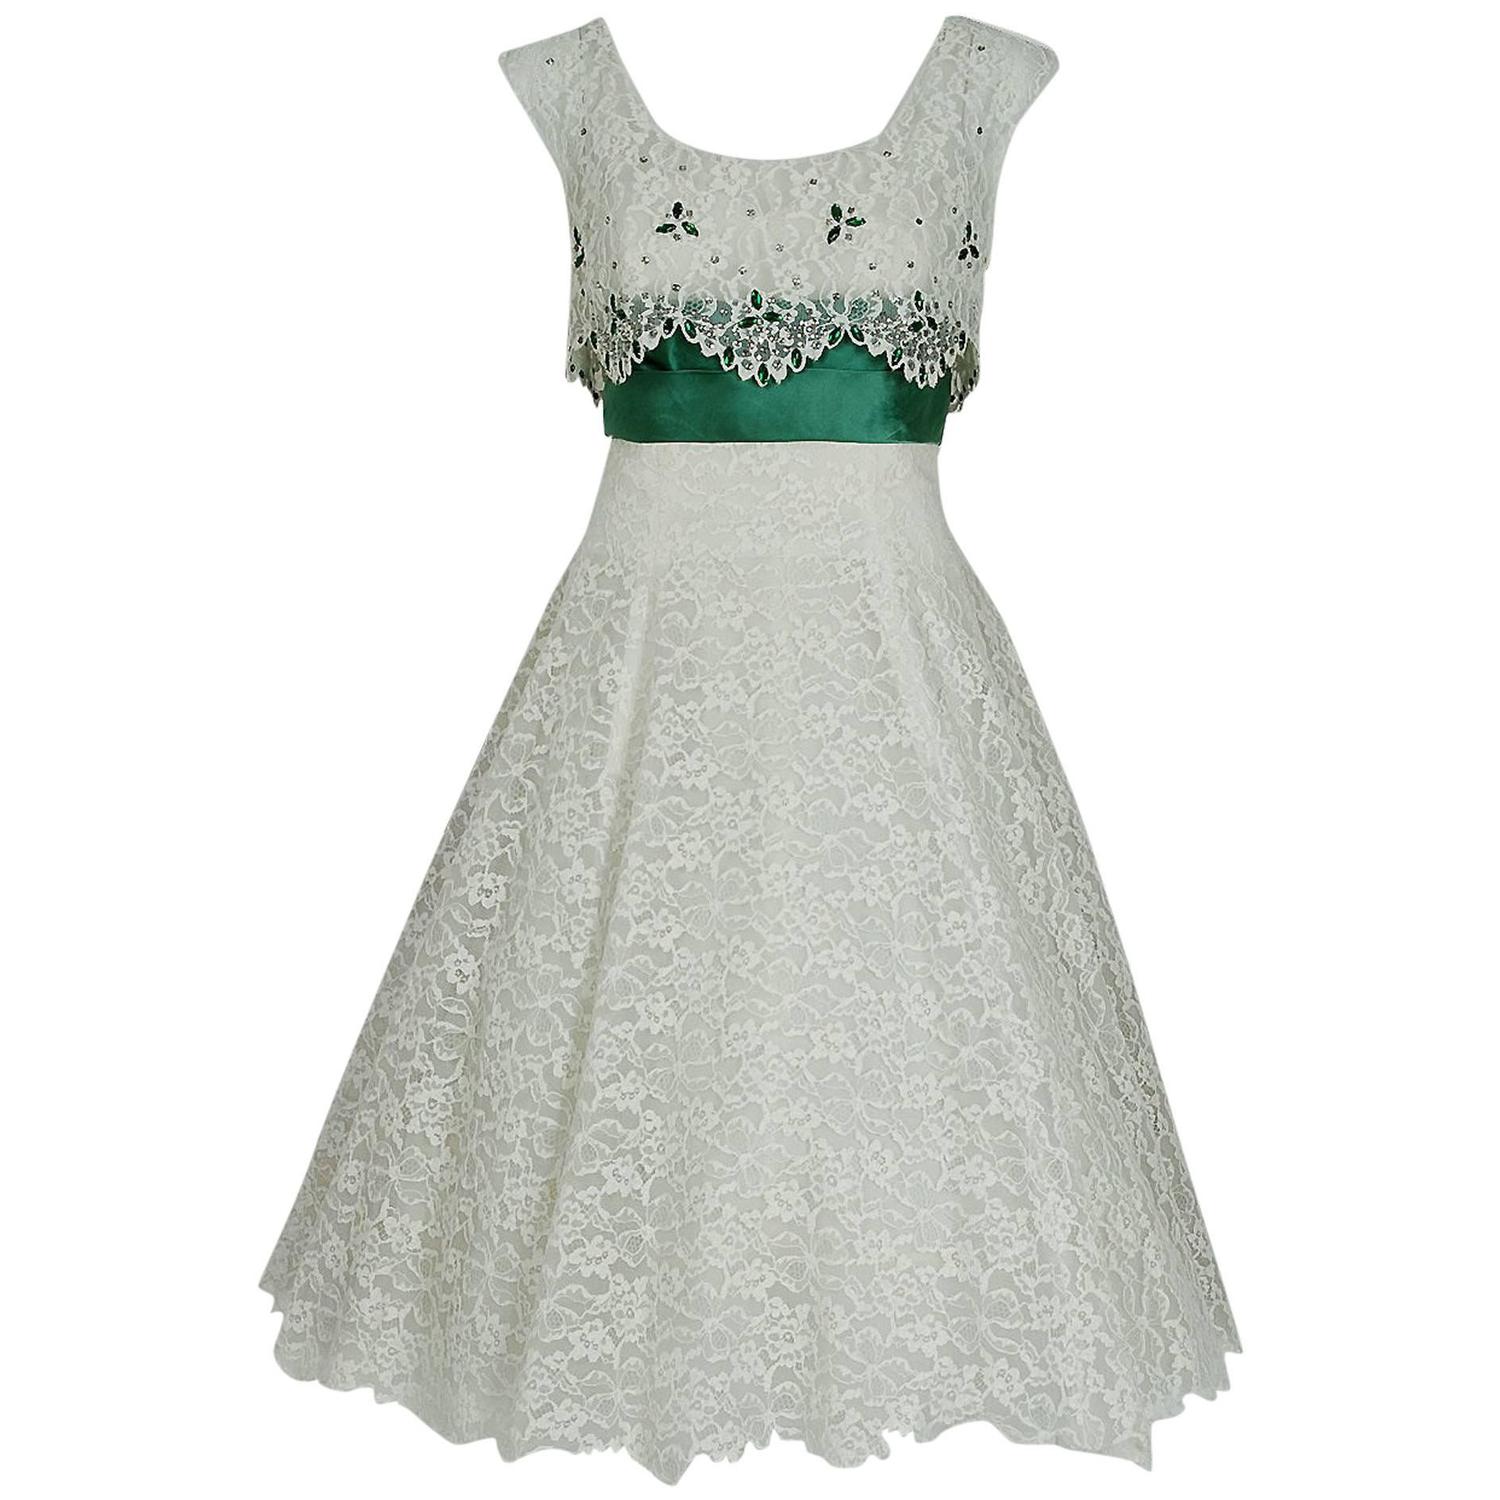 1950's Peggy Hunt White Lace and Green Satin Rhinestone Shelf-Bust ...